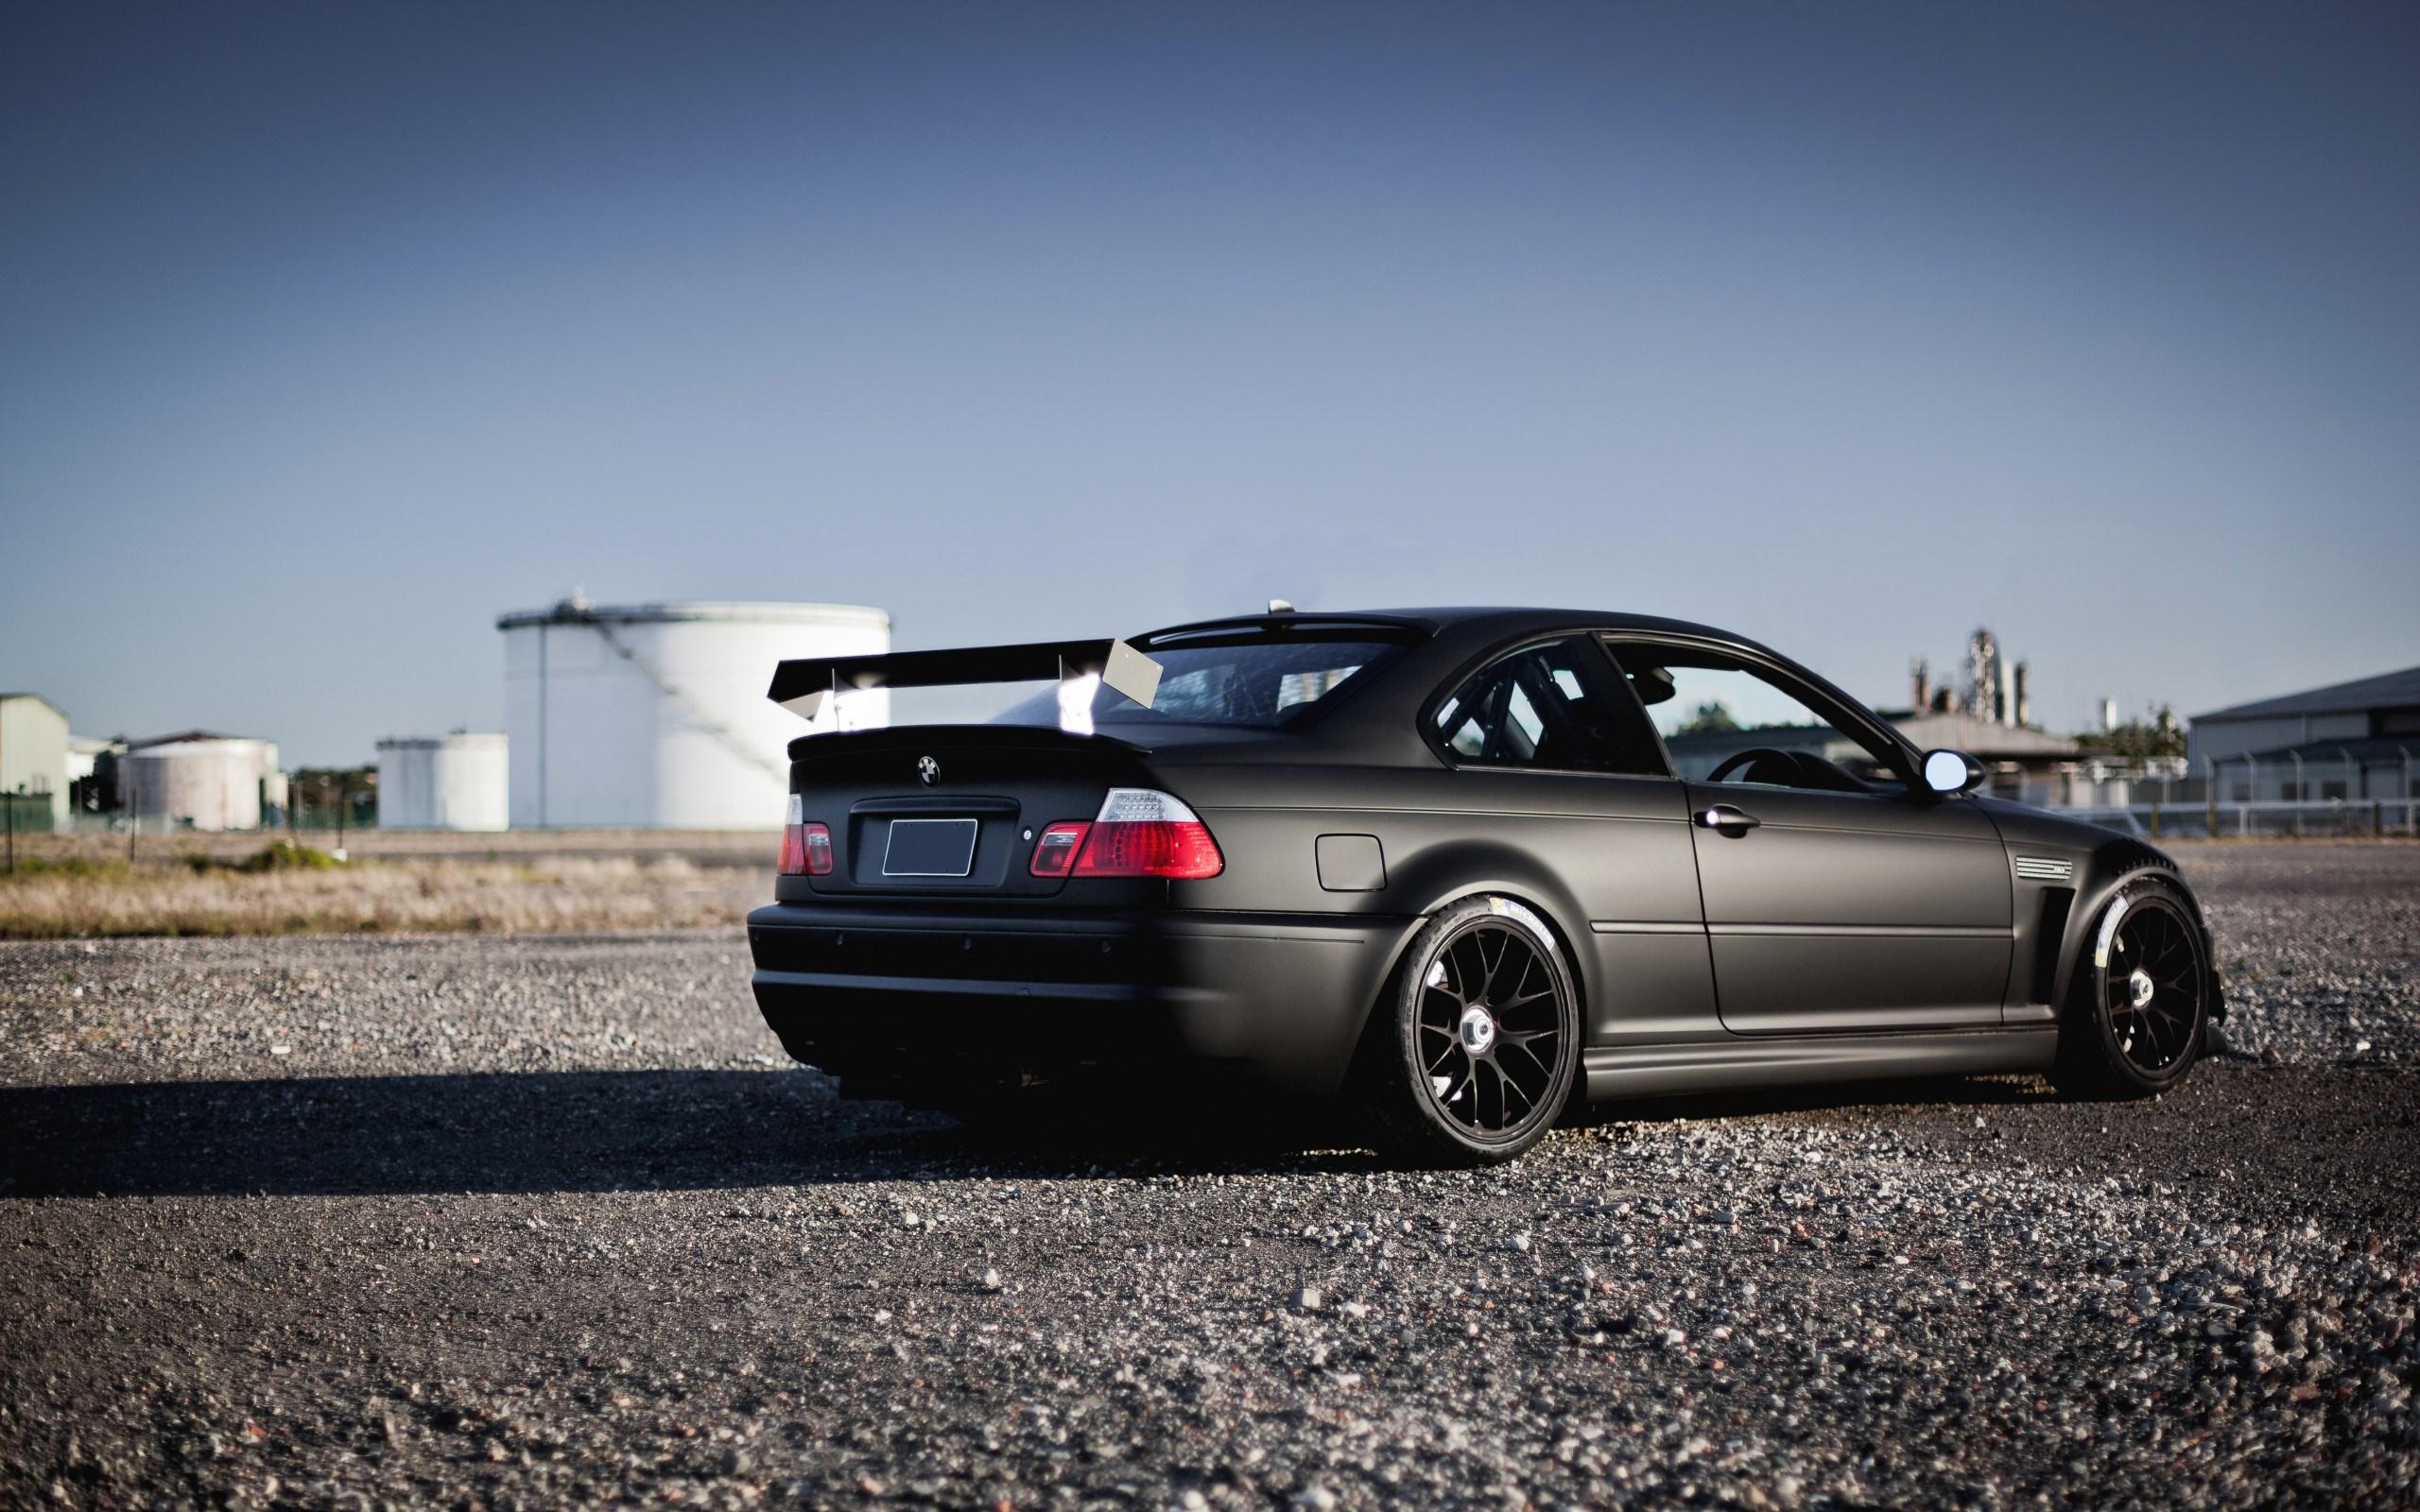 Image for BMW E46 M3 Tuning Car Wallpaper